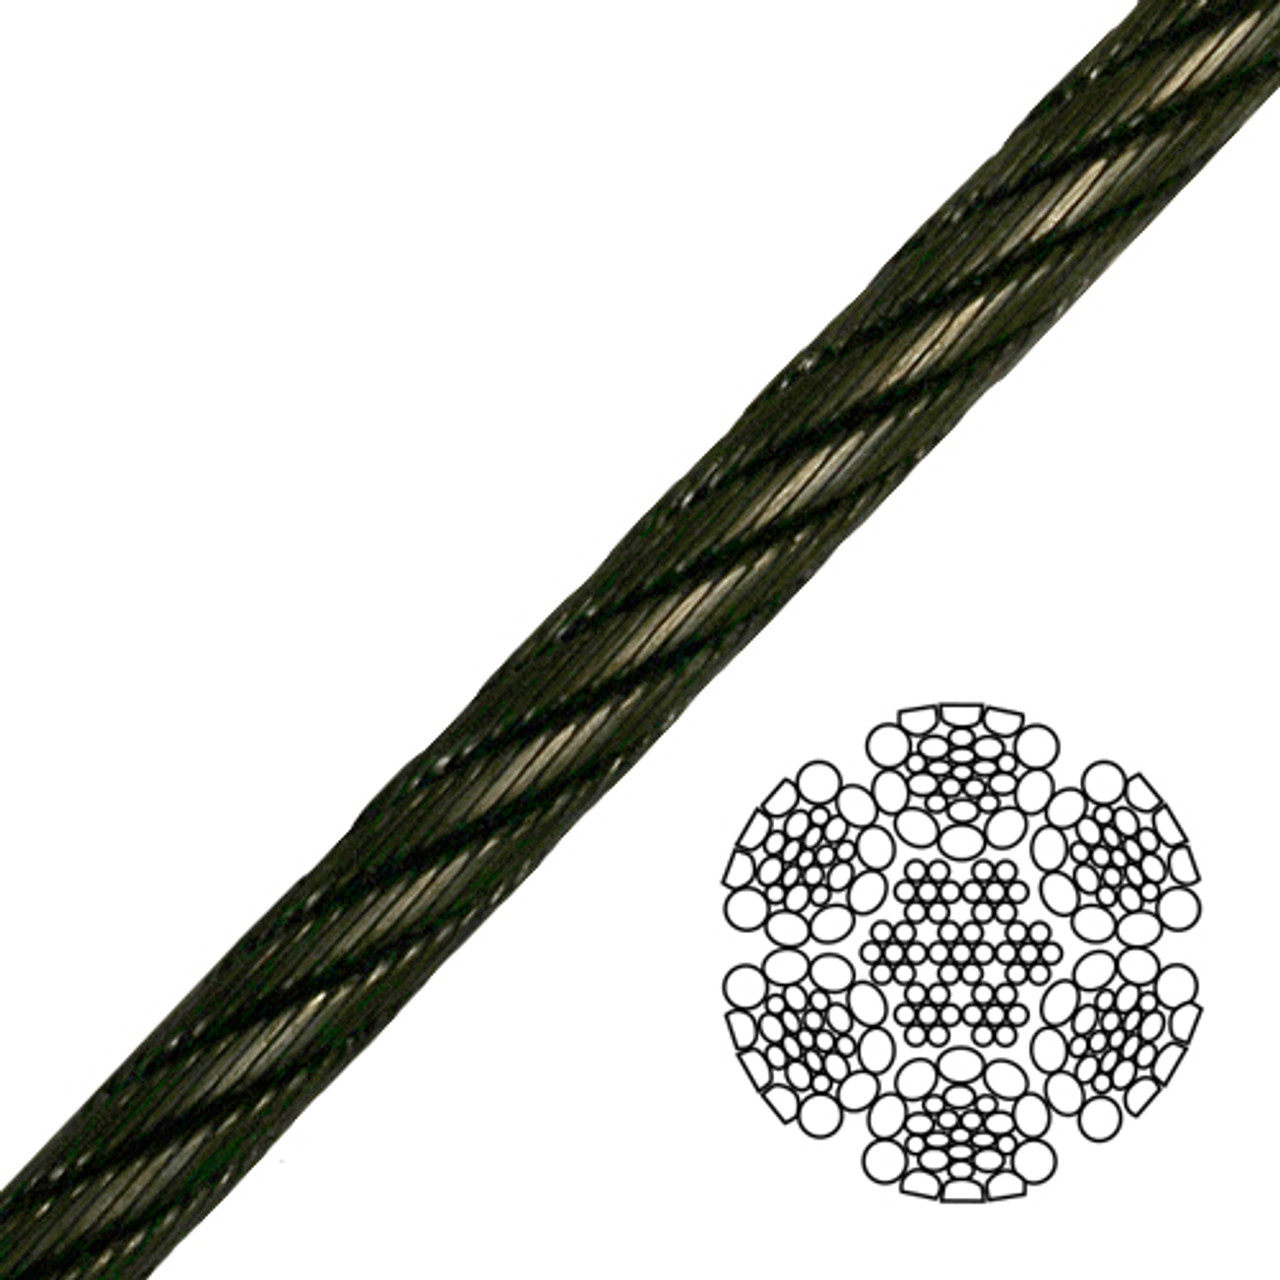 1/2 6x26 Impact Swaged Wire Rope - 36800 lbs Breaking Strength